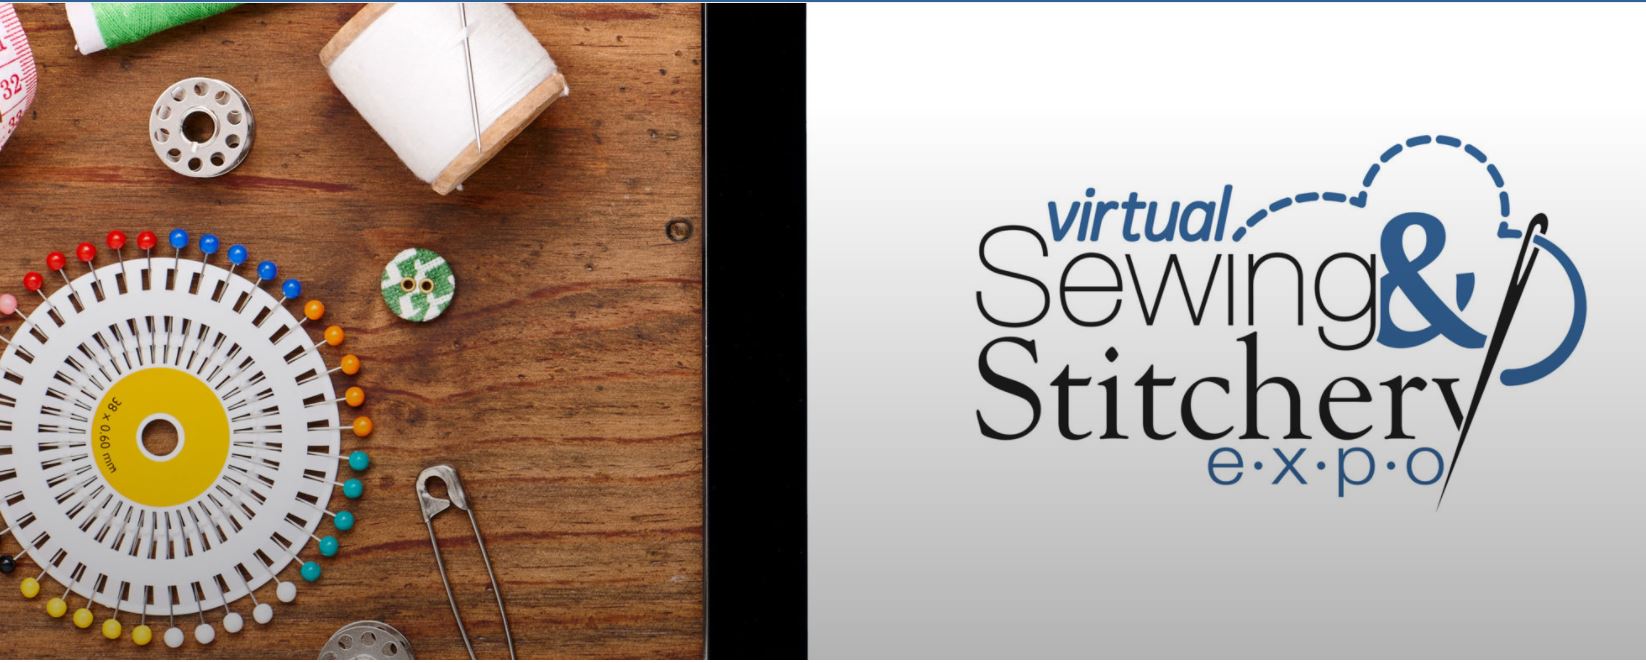 (Virtual) Sewing and Stitchery Expo Registration Starts Today!